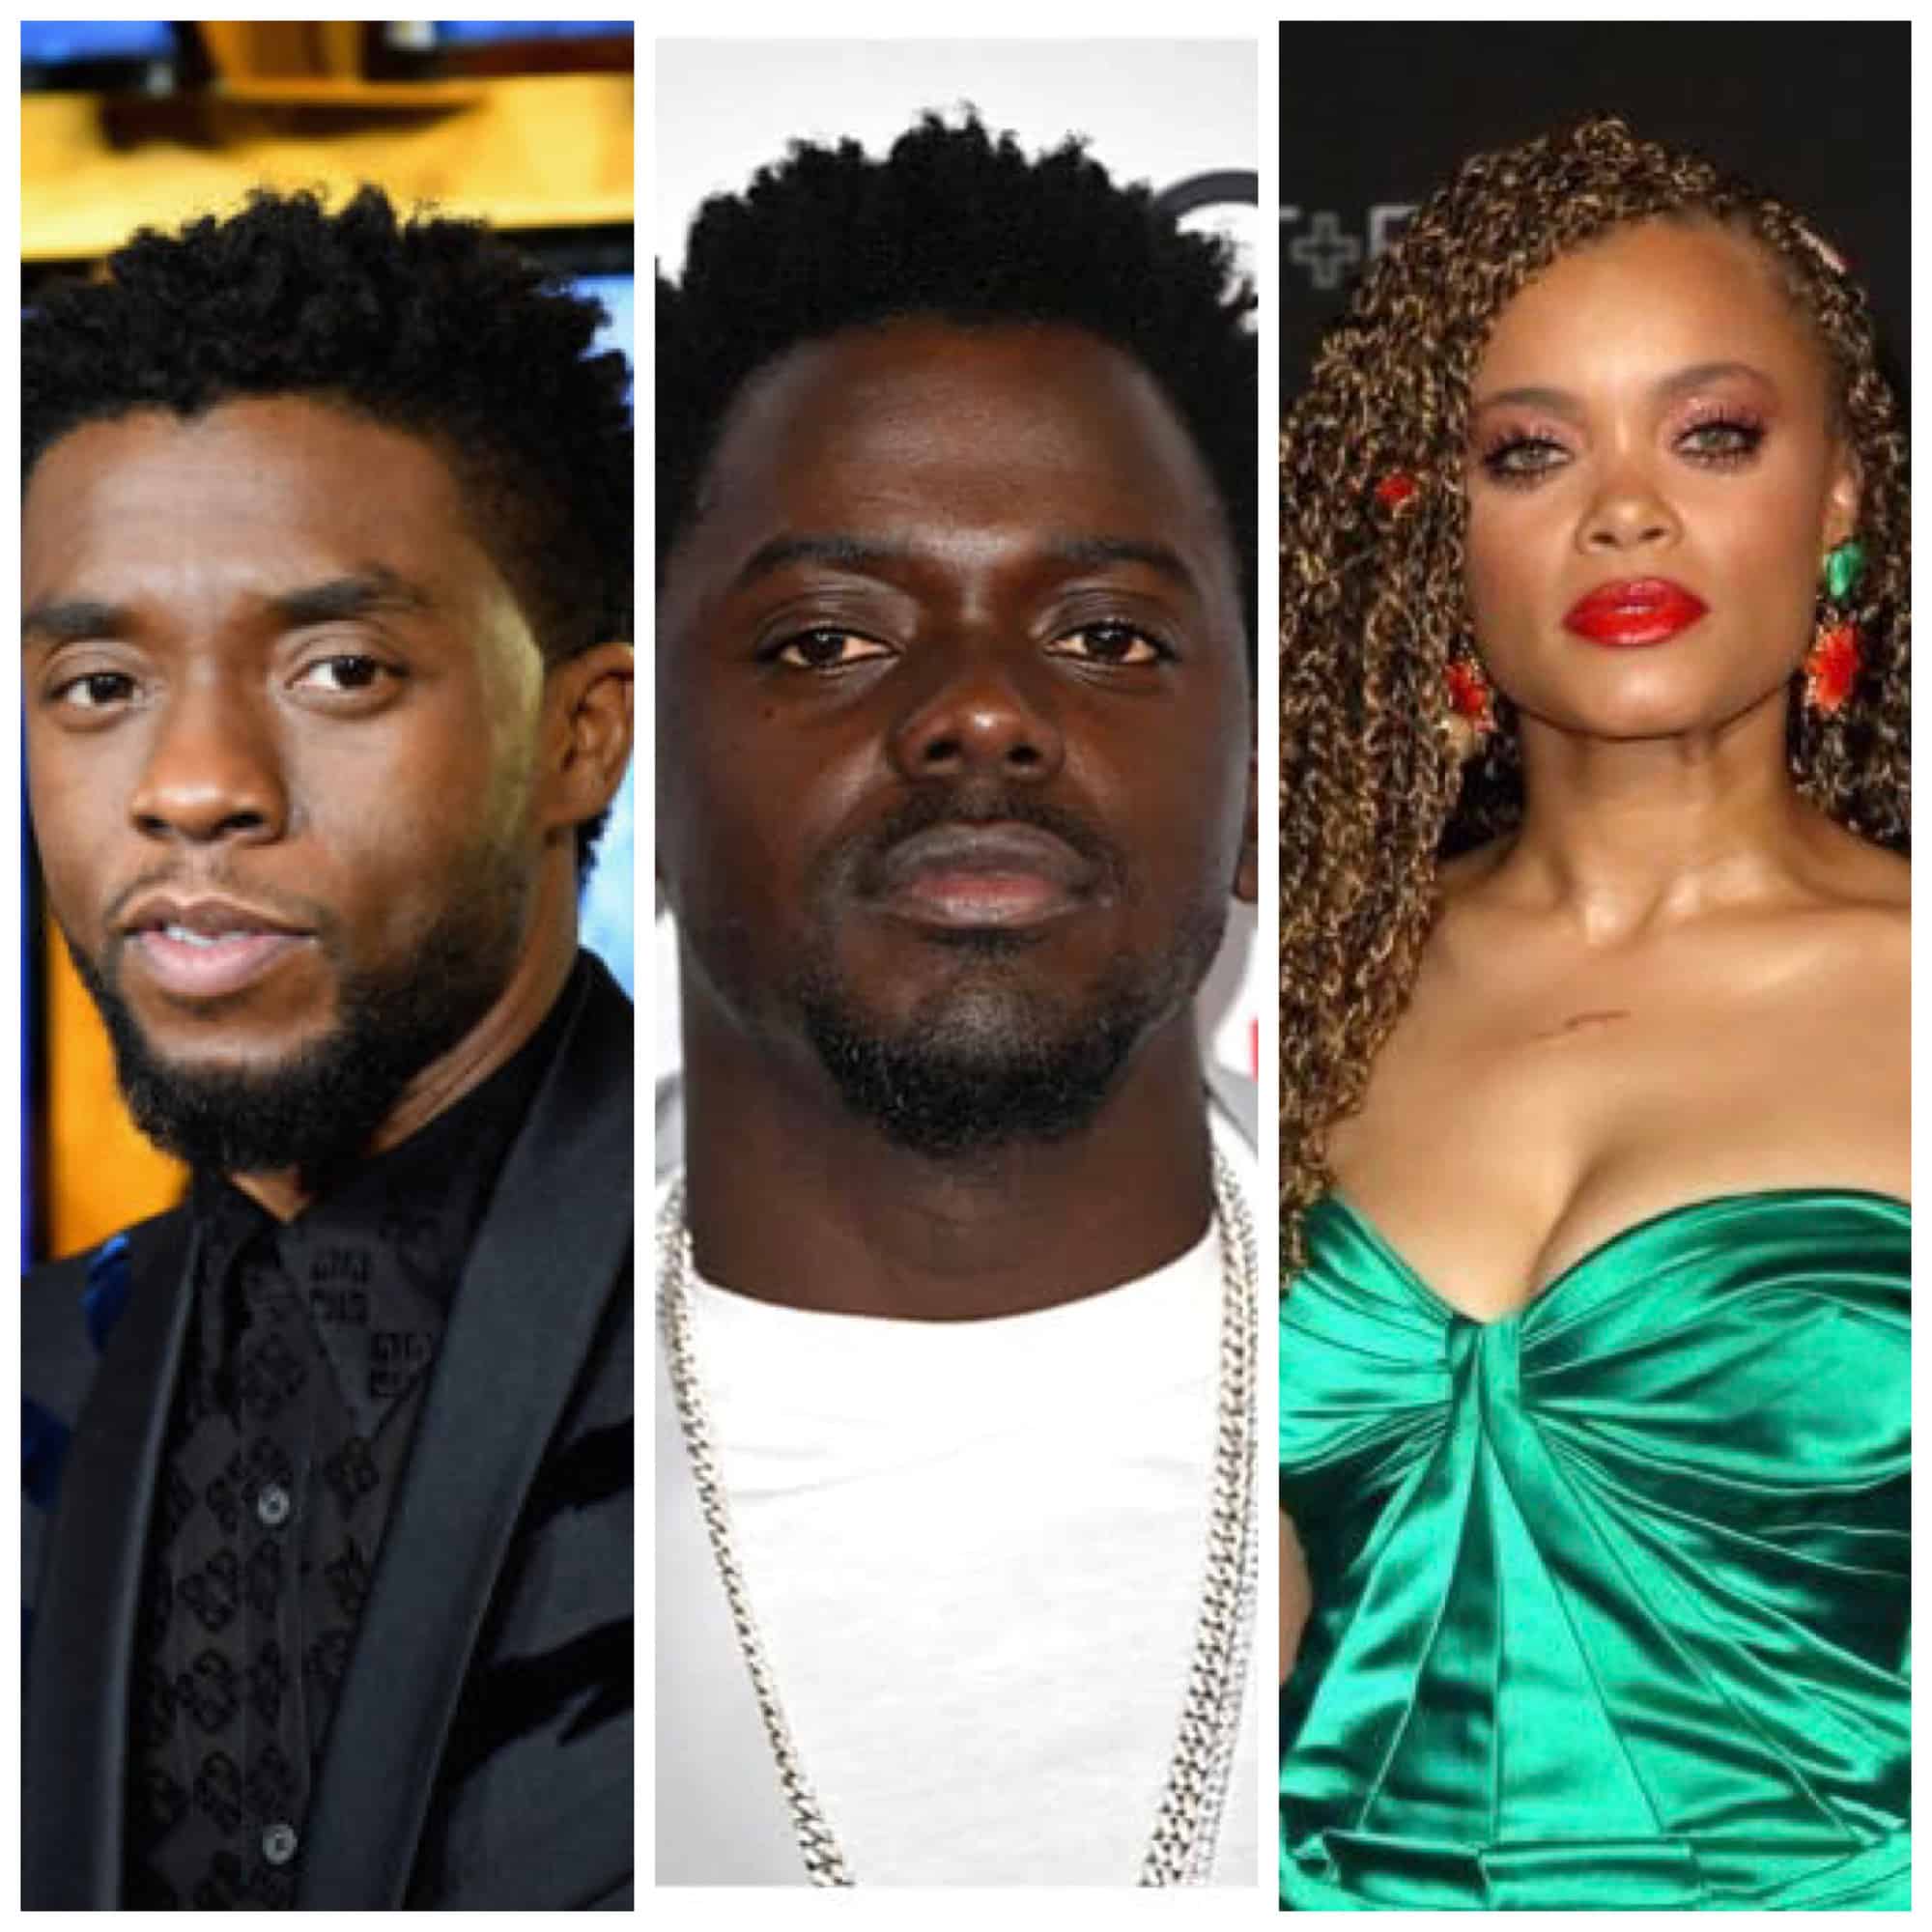 Black Excellence Was On Full Display At The Golden Globes—As Chadwick Boseman, Daniel Kaluuya, Andra Day & More Take Home Awards!